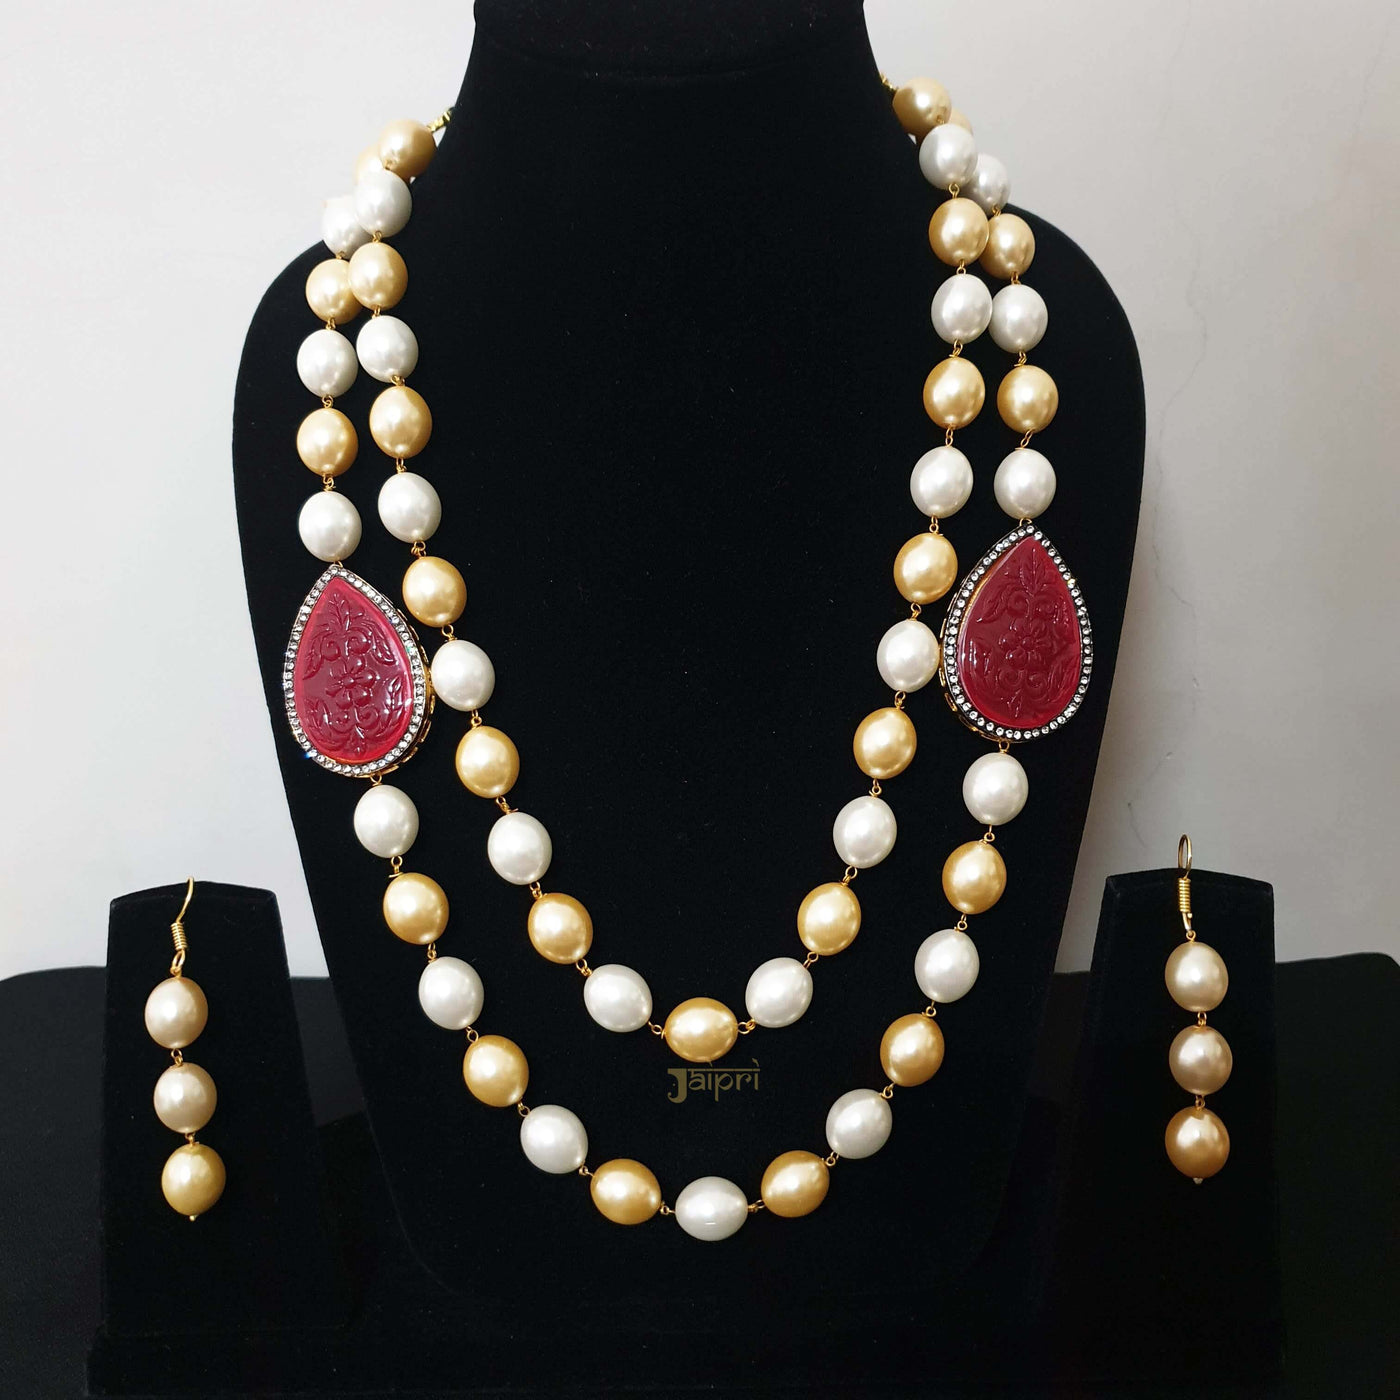 Premium Pearl And Carving Stone Necklace With Earrings